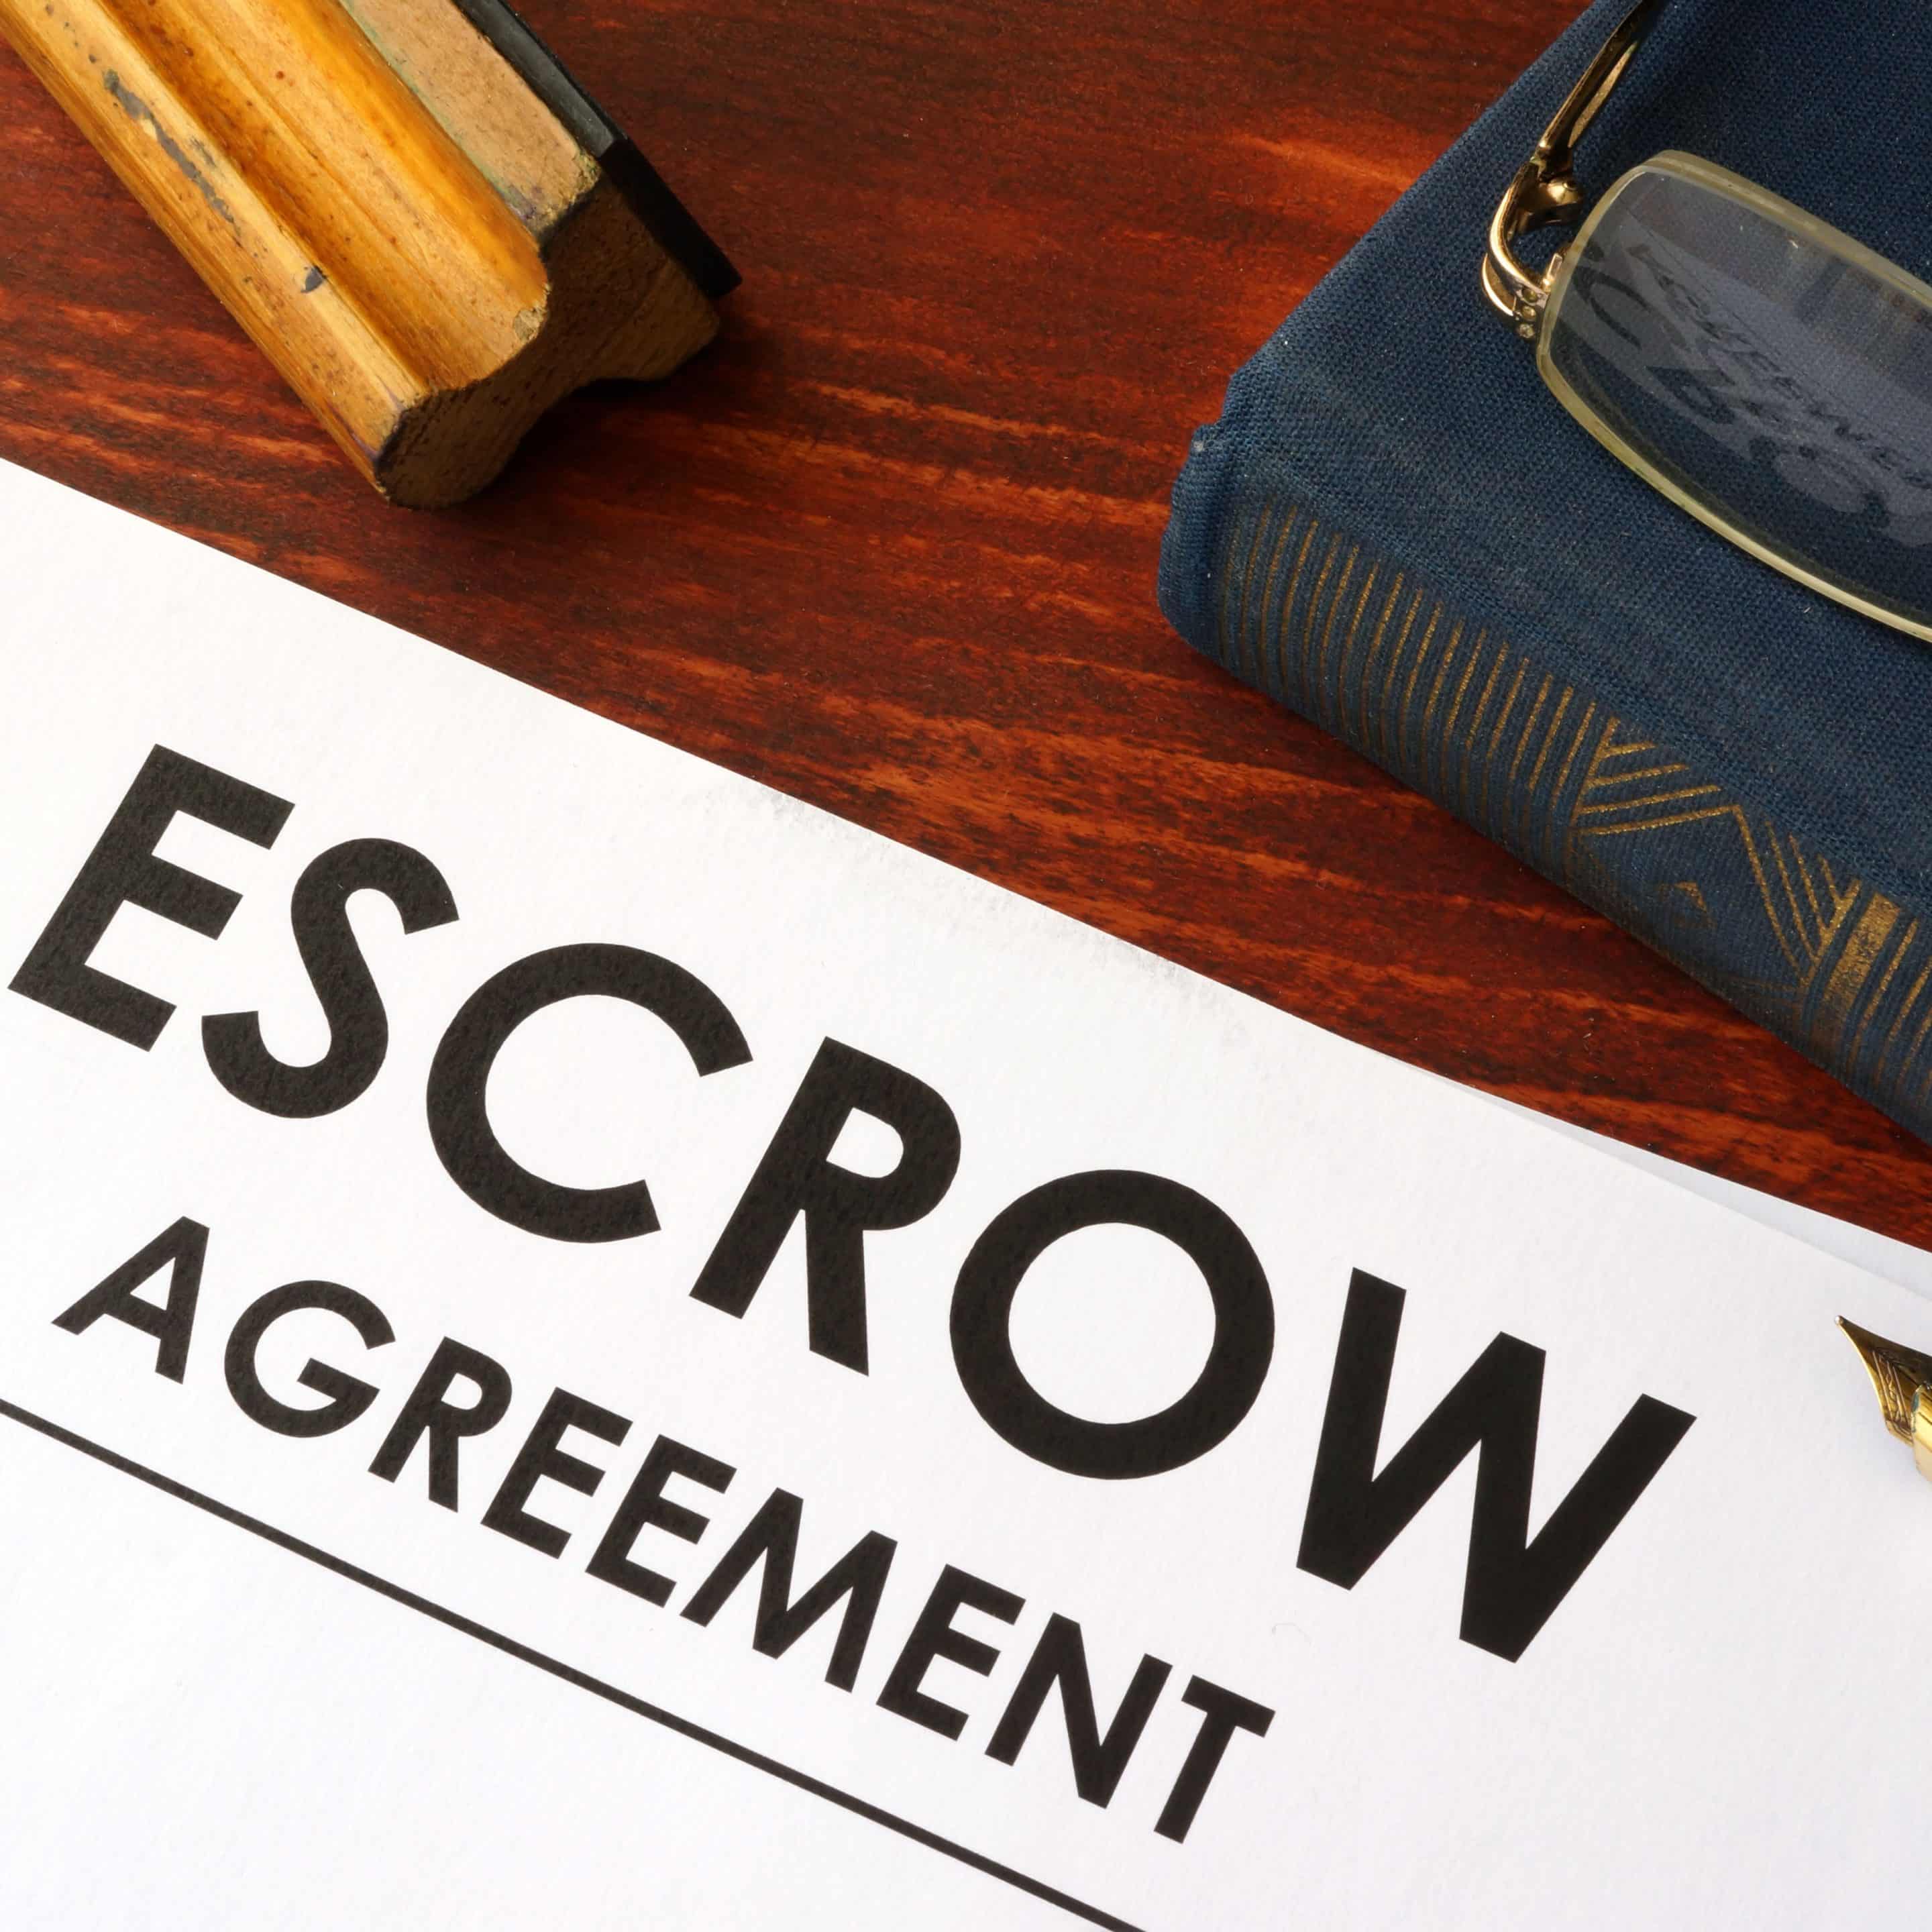 Don’t get caught short, look at your escrow account today!